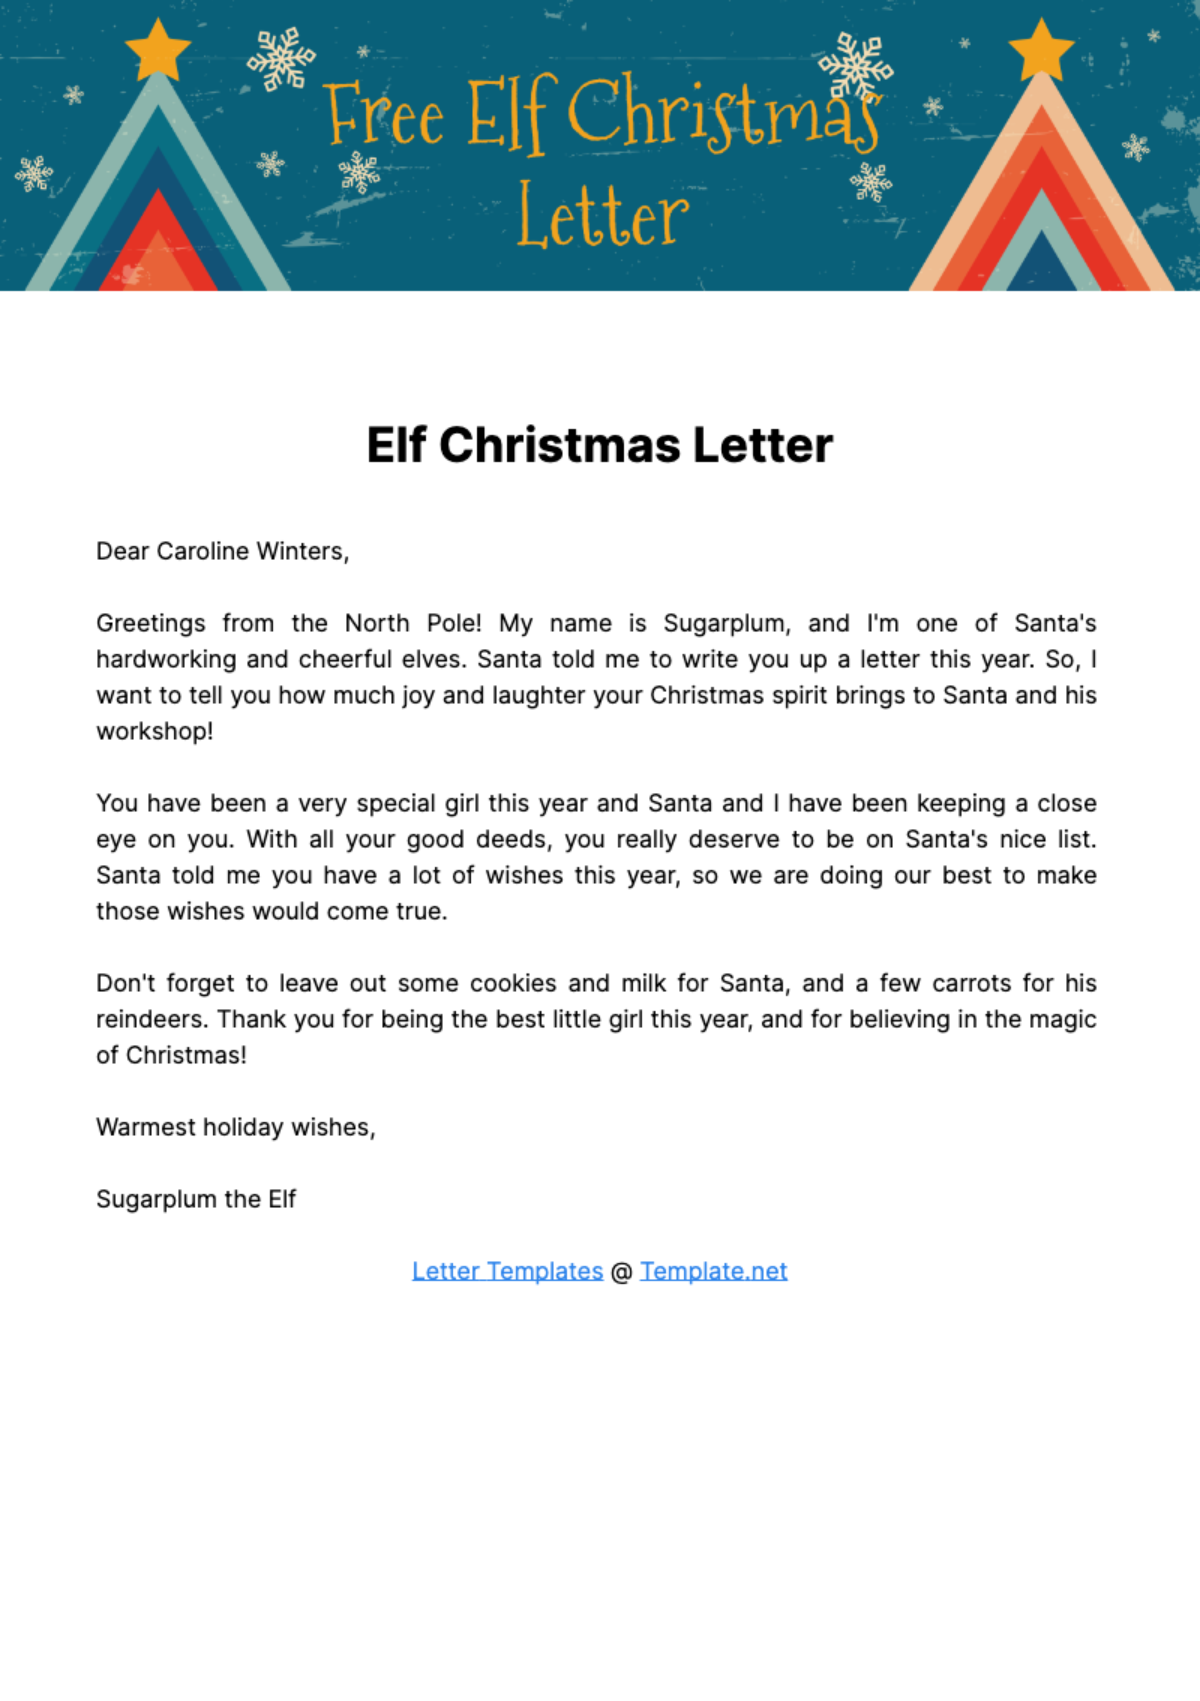 Free Elf Christmas Letter Template